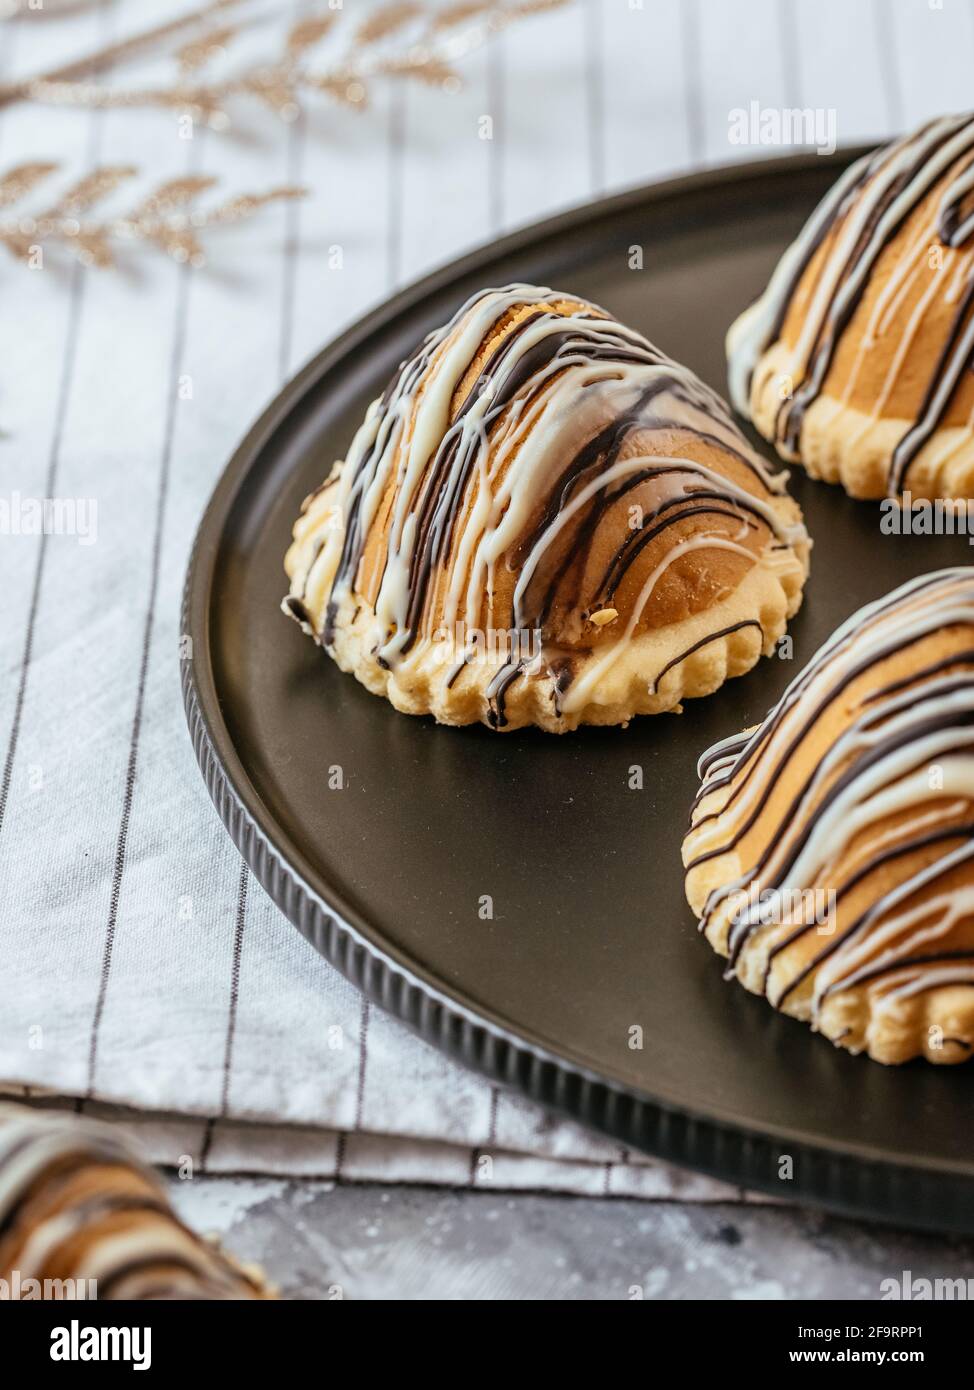 homemade desserts with caramel, nuts on a light background Stock Photo ...